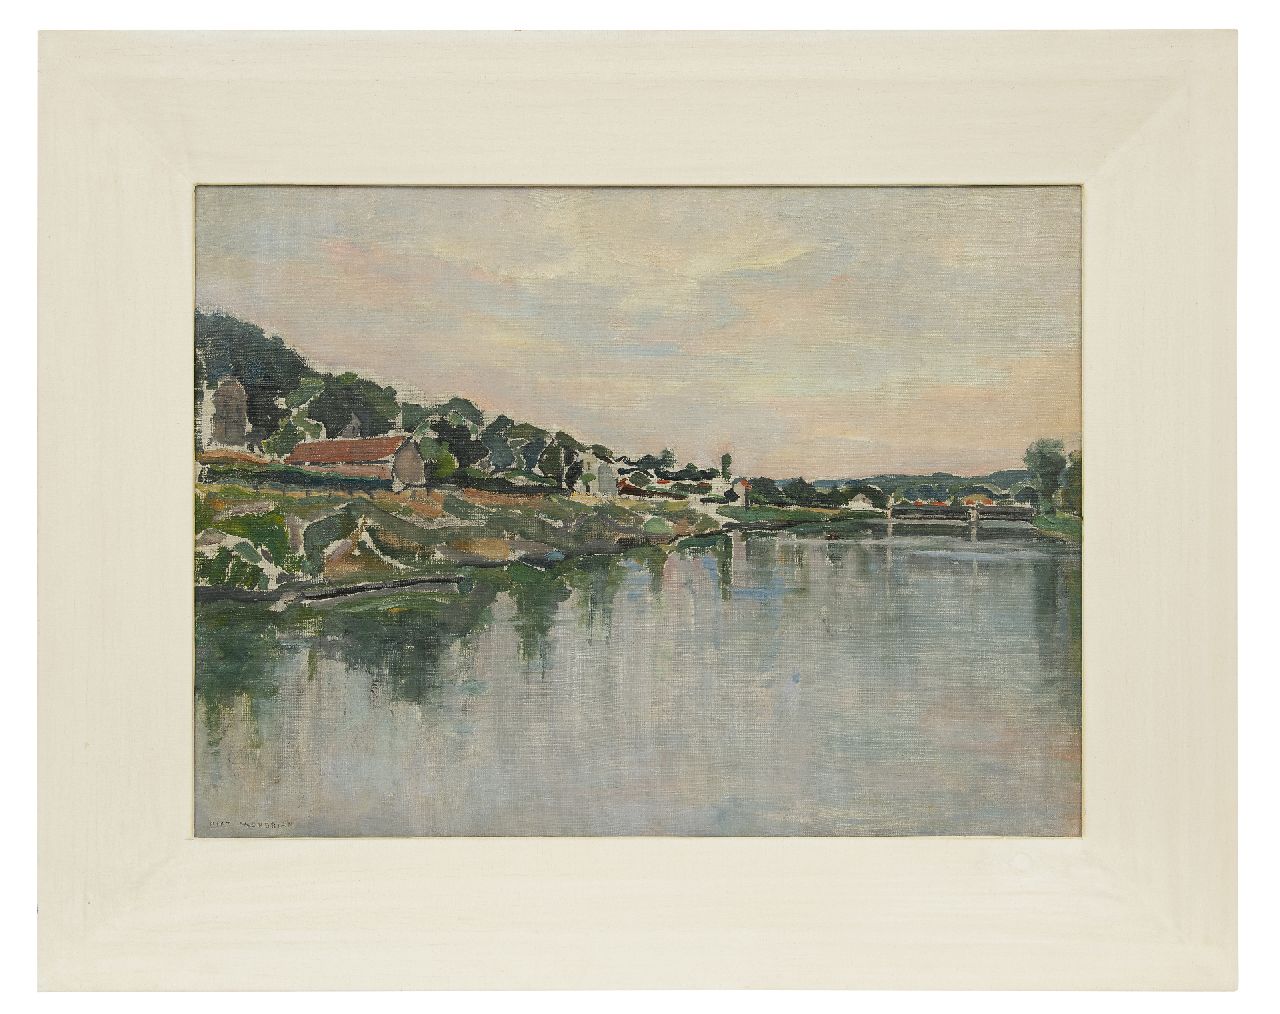 Mondriaan P.C.  | Pieter Cornelis 'Piet' Mondriaan | Paintings offered for sale | The Banks of the Seine, oil on canvas 54.2 x 73.1 cm, signed l.l. and painted in 1931